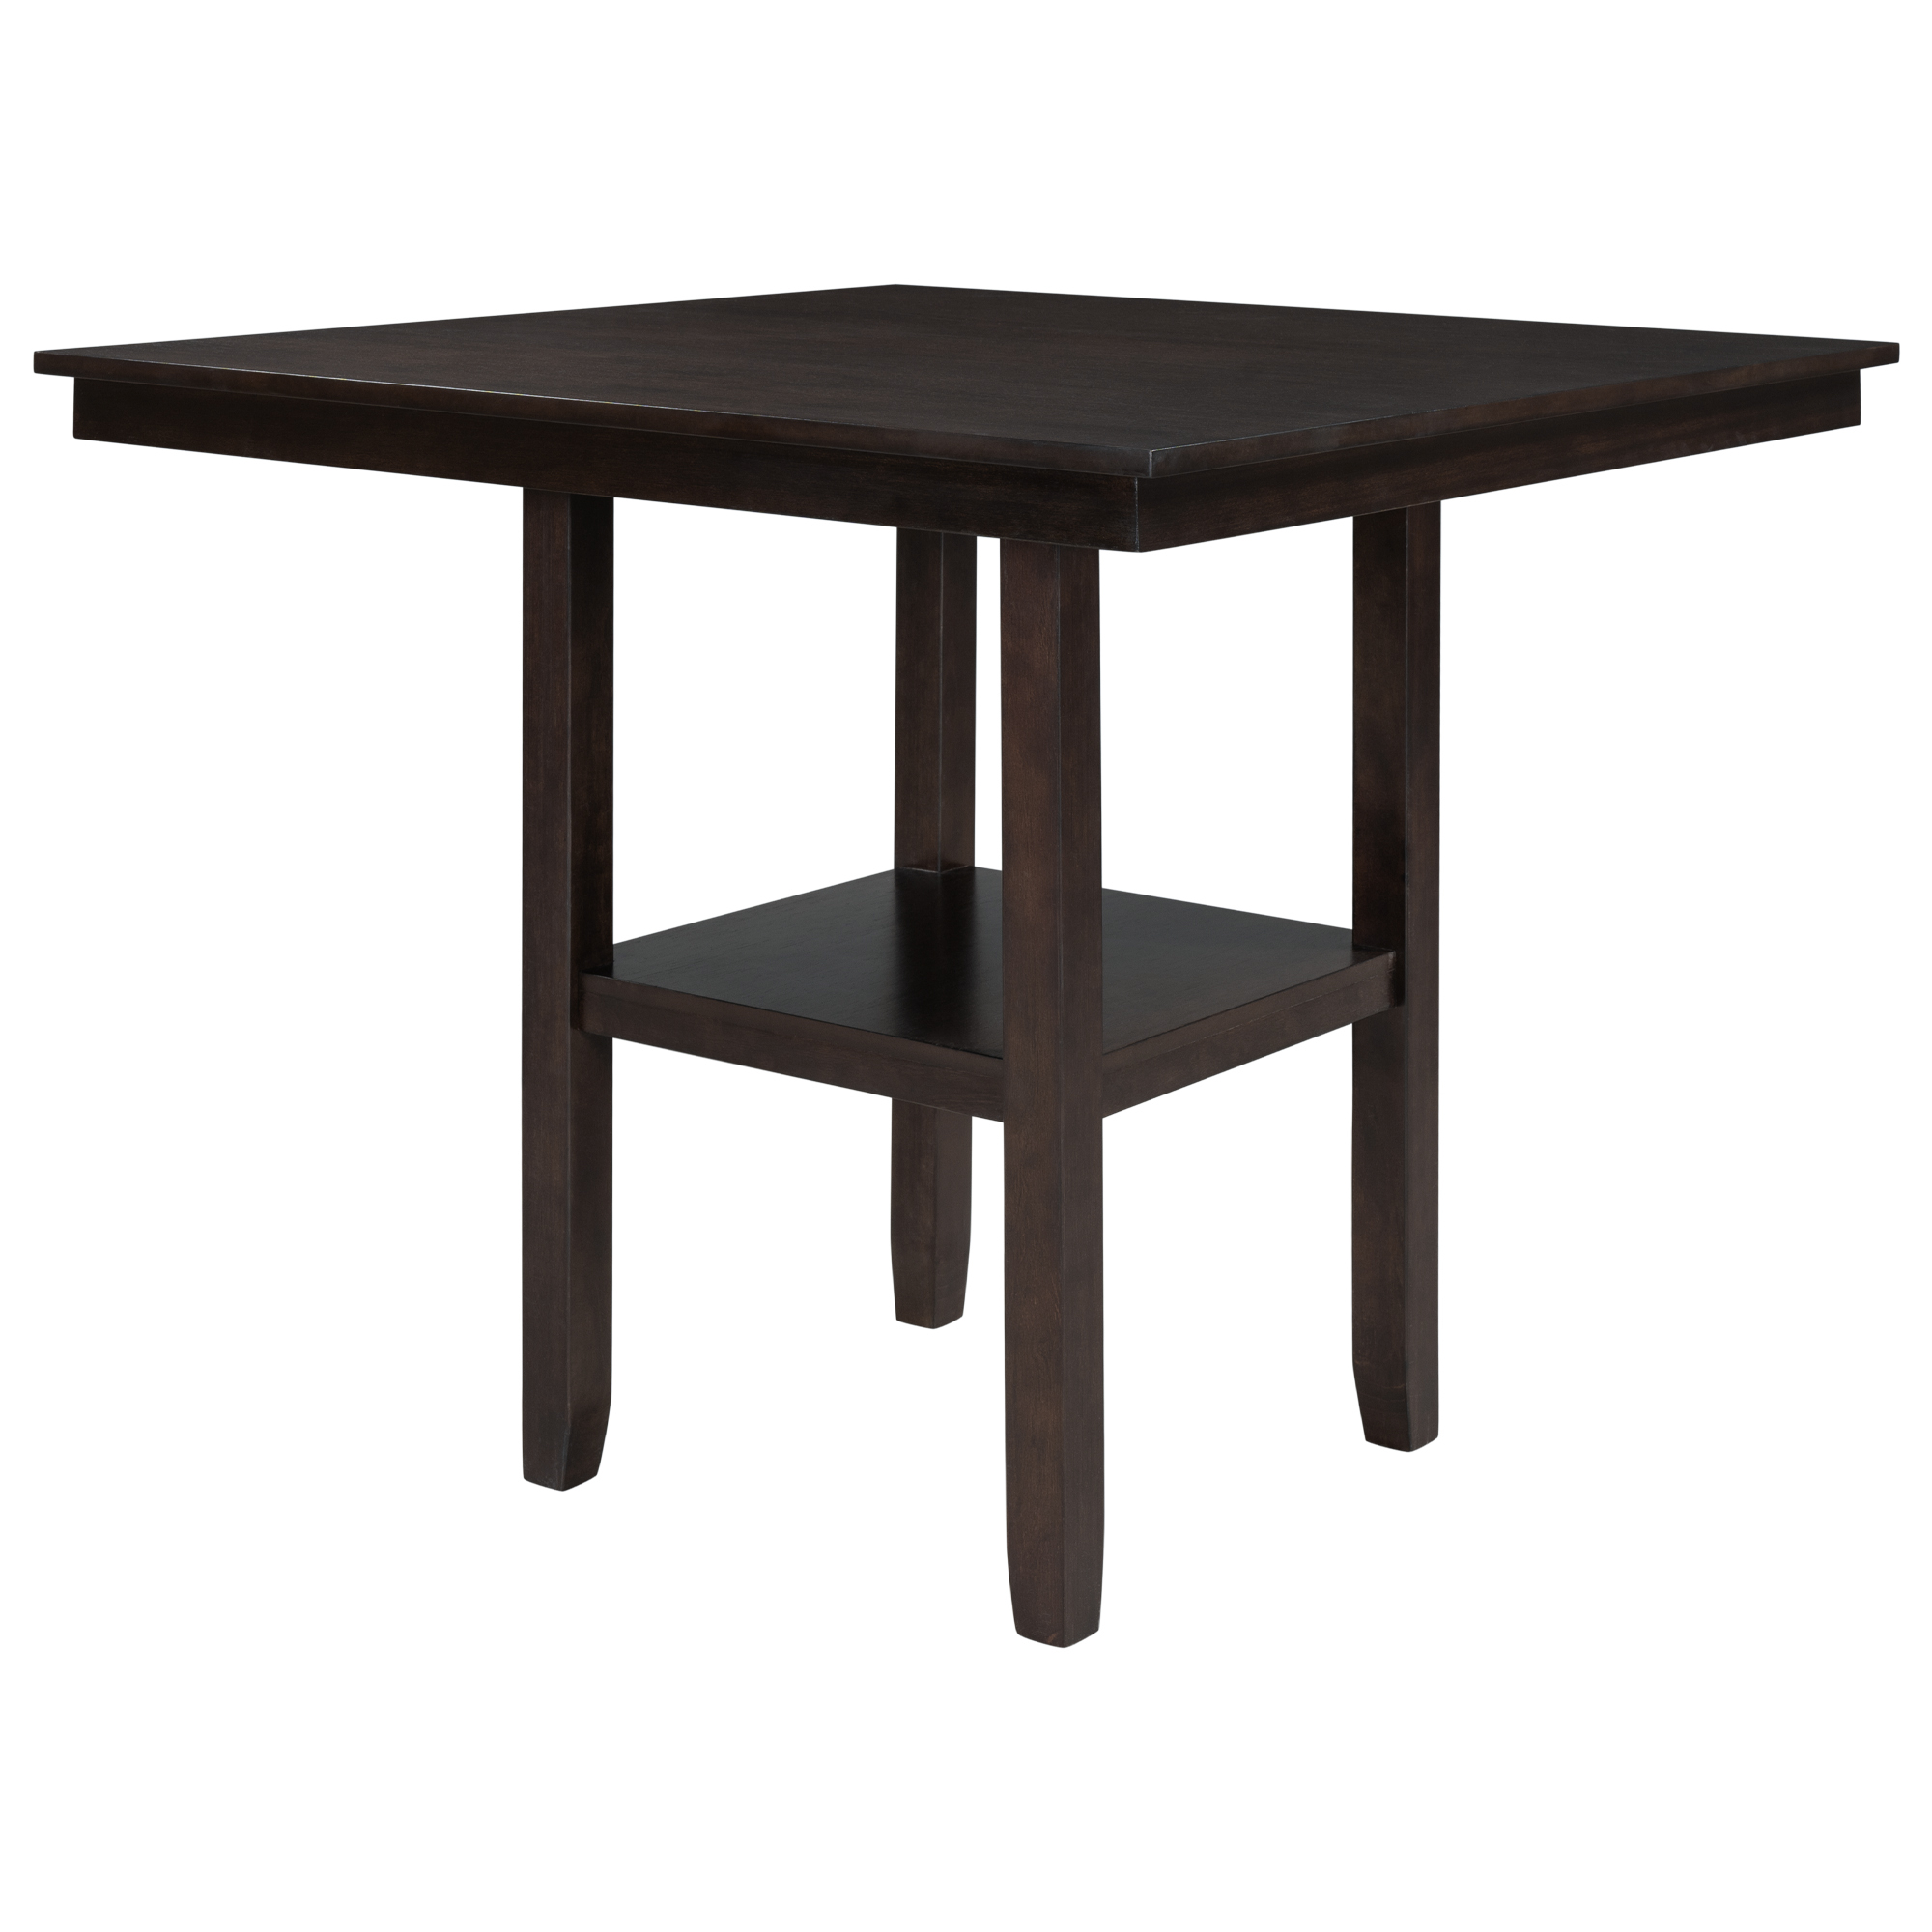 Wooden Counter Height Dining Table with Storage Shelving,Espresso-Boyel Living